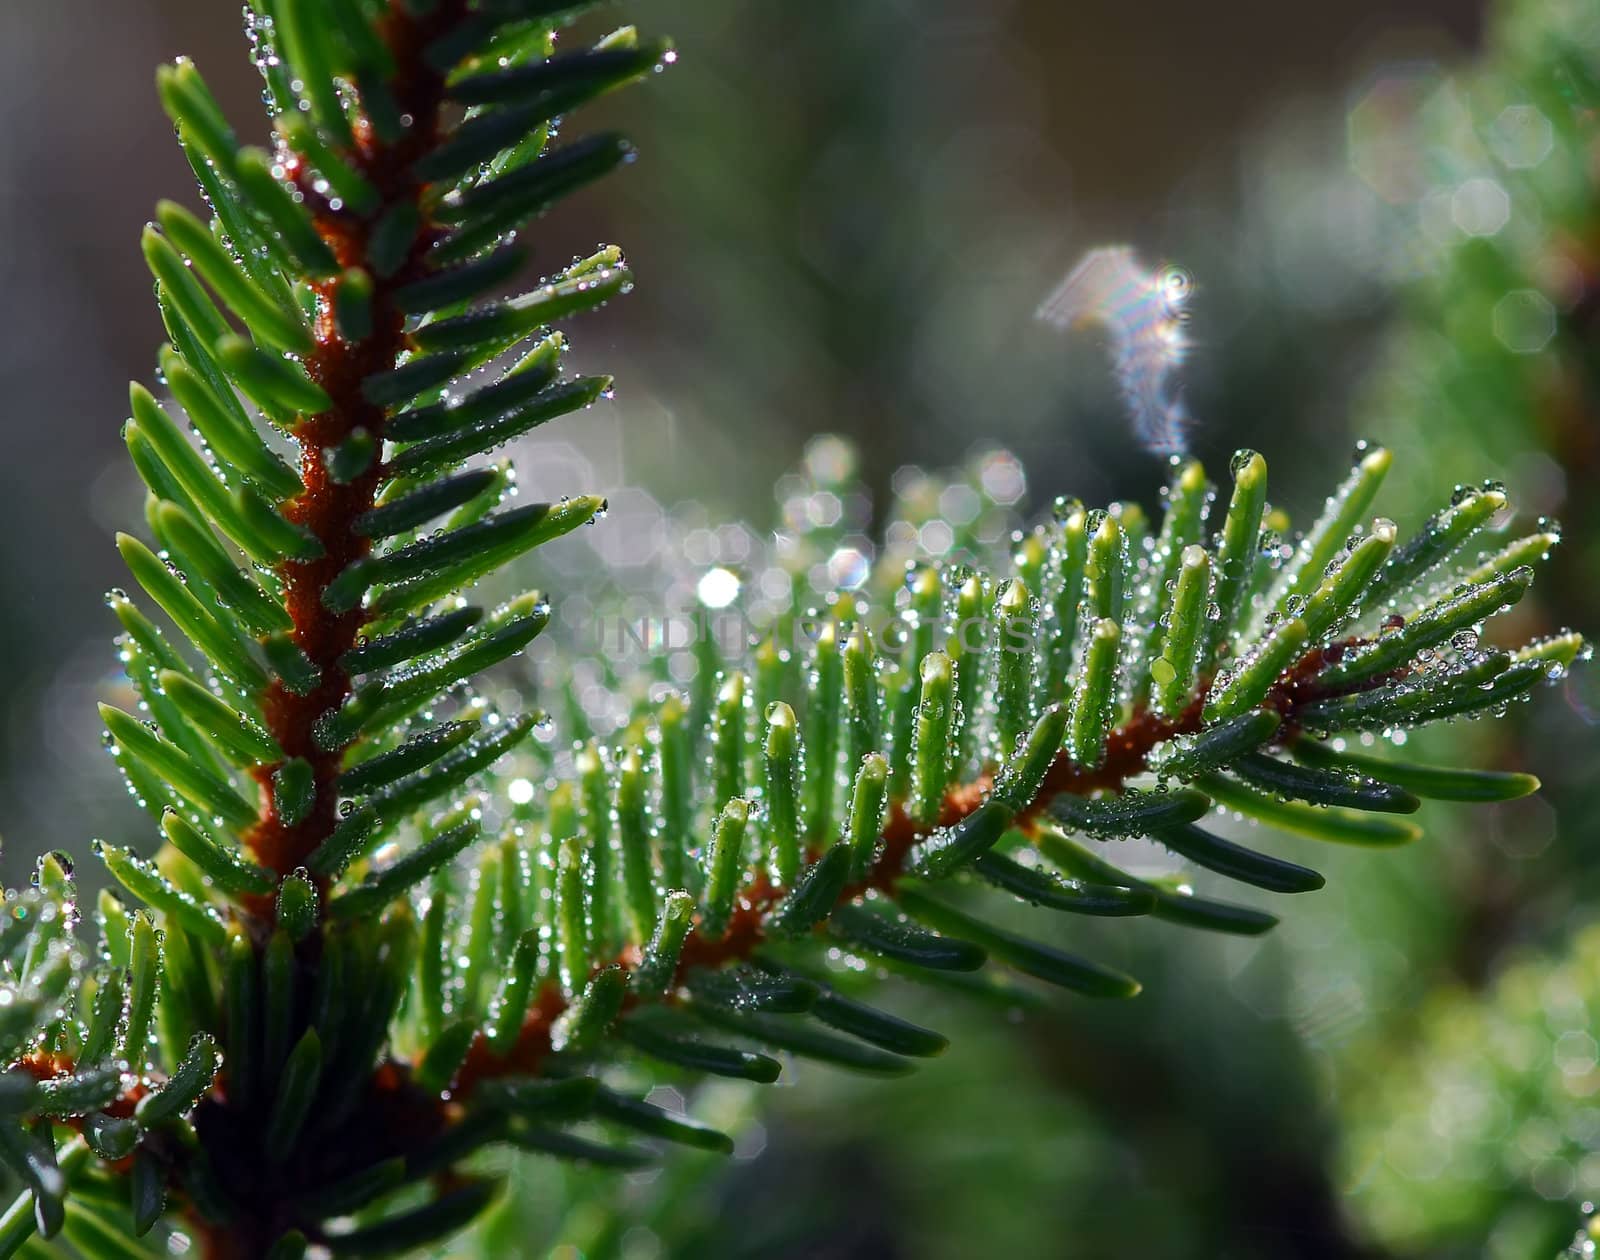 A macro of an evergreen branch with it's needlesand lot of dropplets